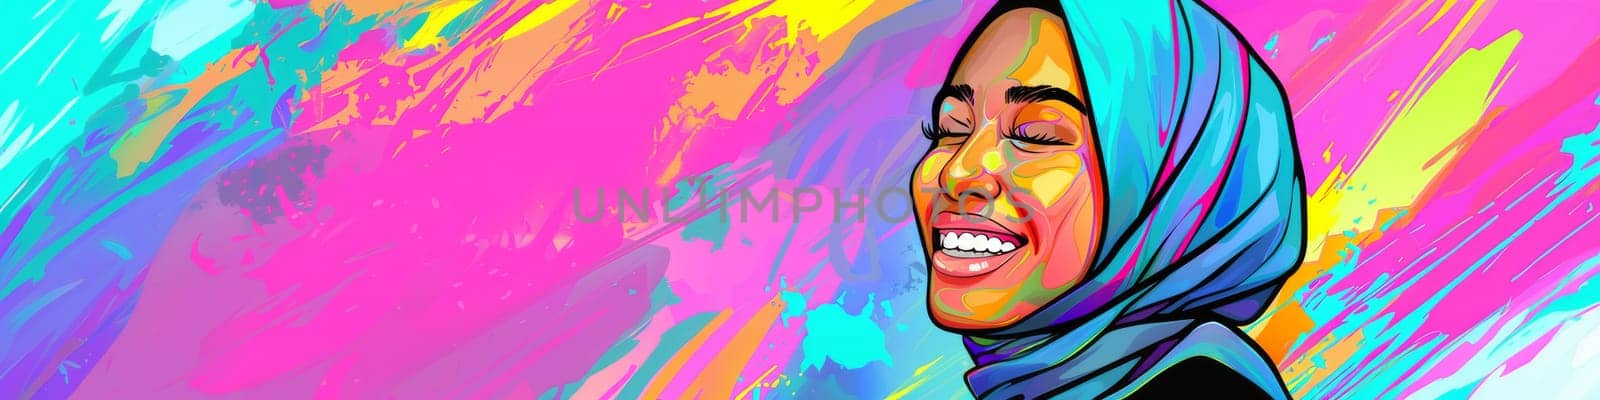 Portrait of ethnic smiling laughing woman in hijab on the colorful background by Kadula